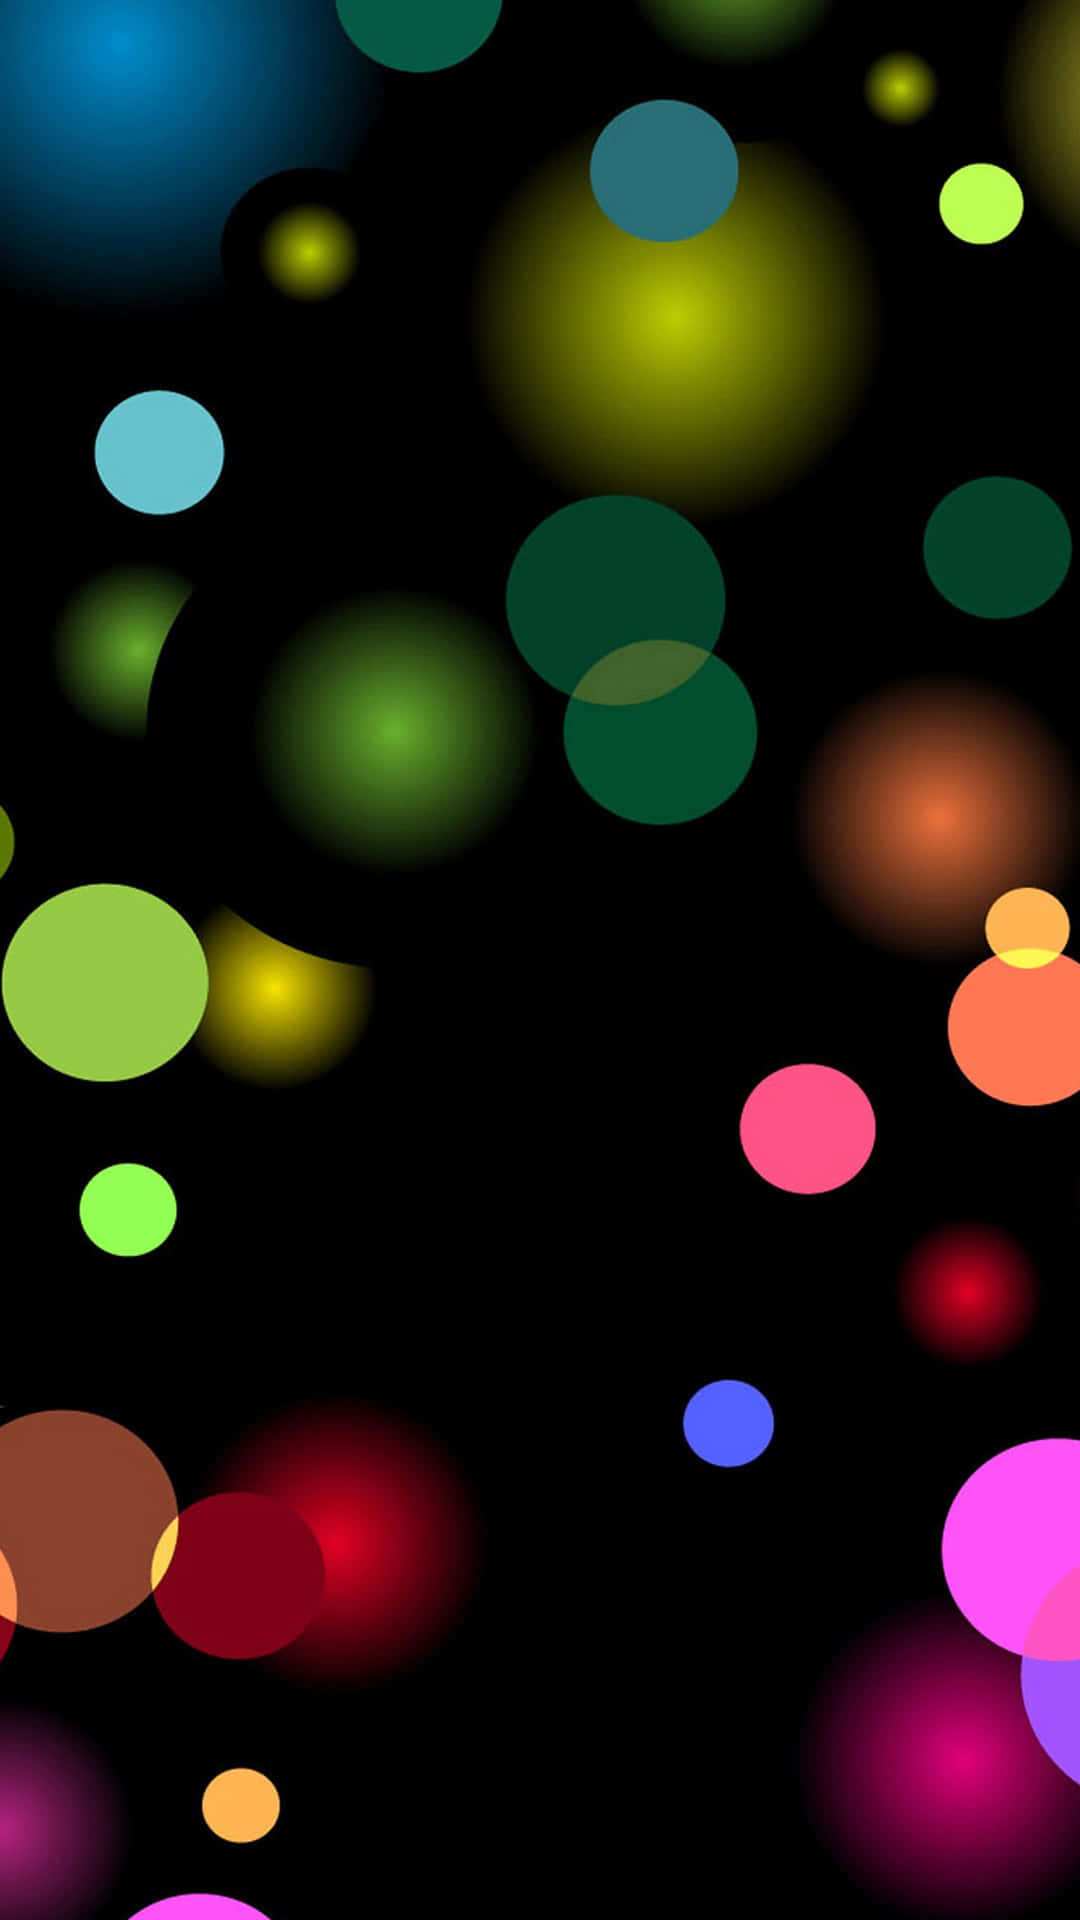 A Black Background With Many Colorful Circles Background